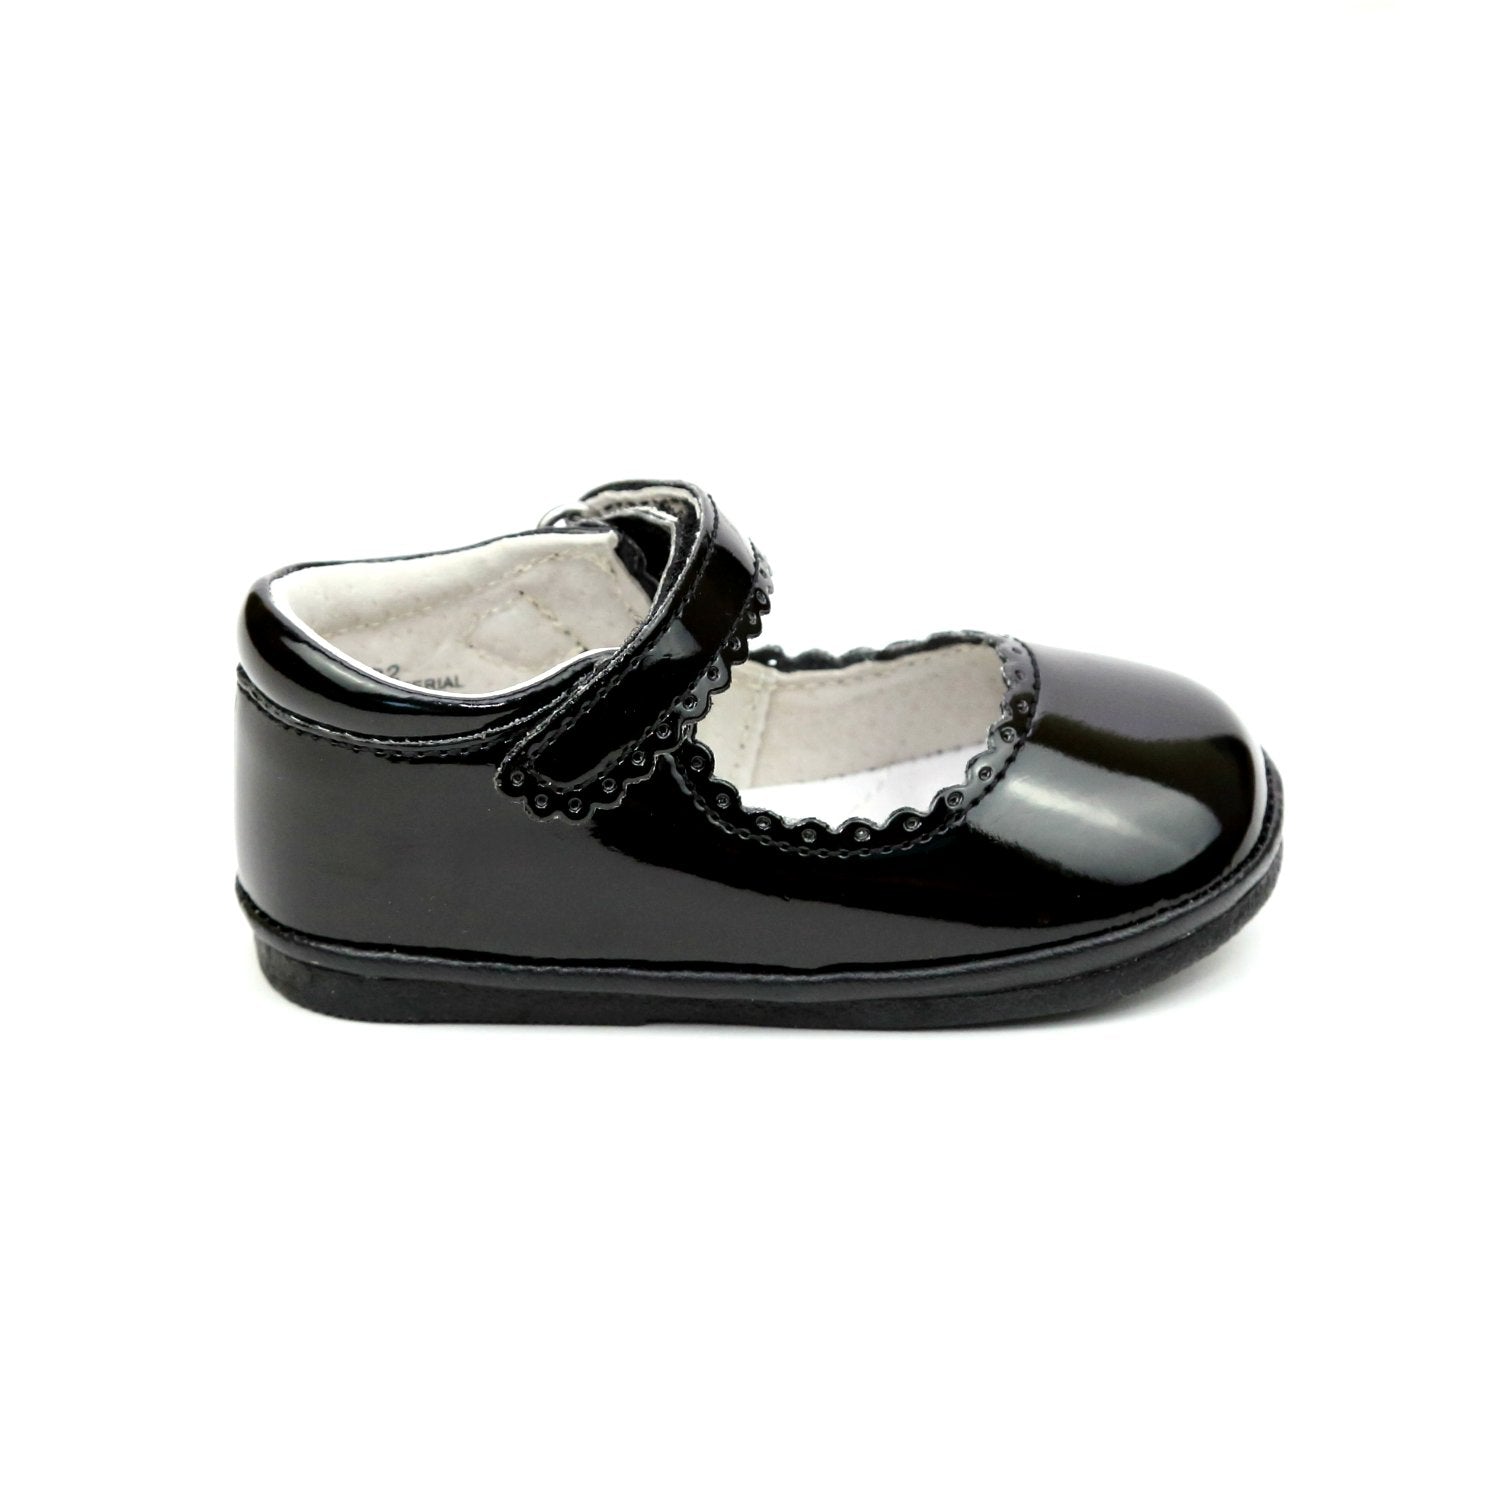 Cara Scalloped Mary Jane - Patent Black Shoes L'Amour   